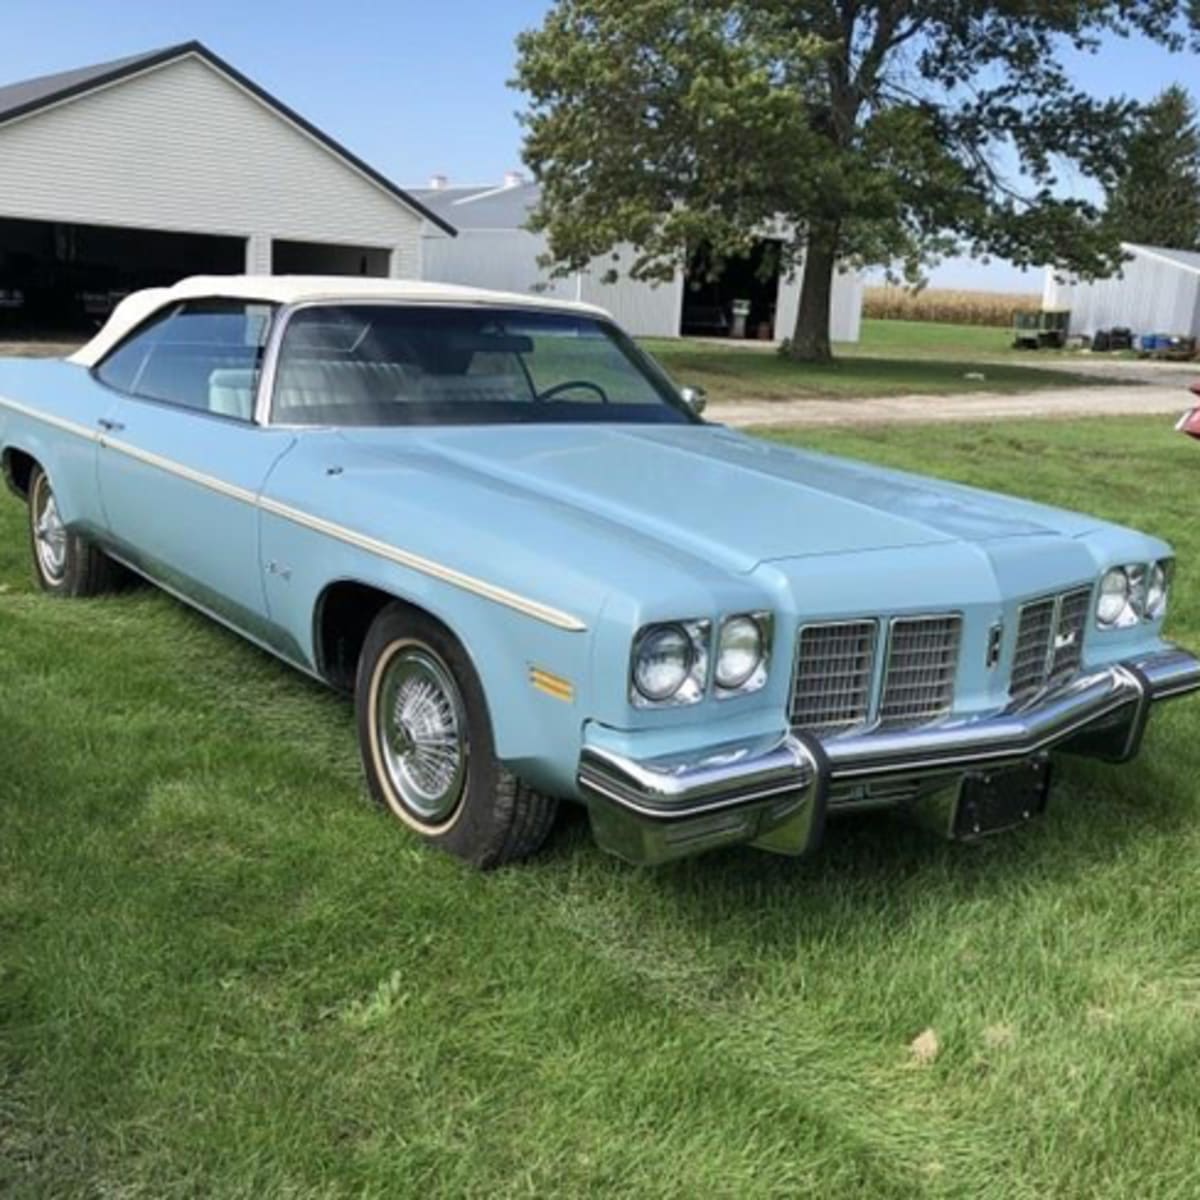 New' 45-mile 1975 Olds 88 Royale convertible still on MSO - Old